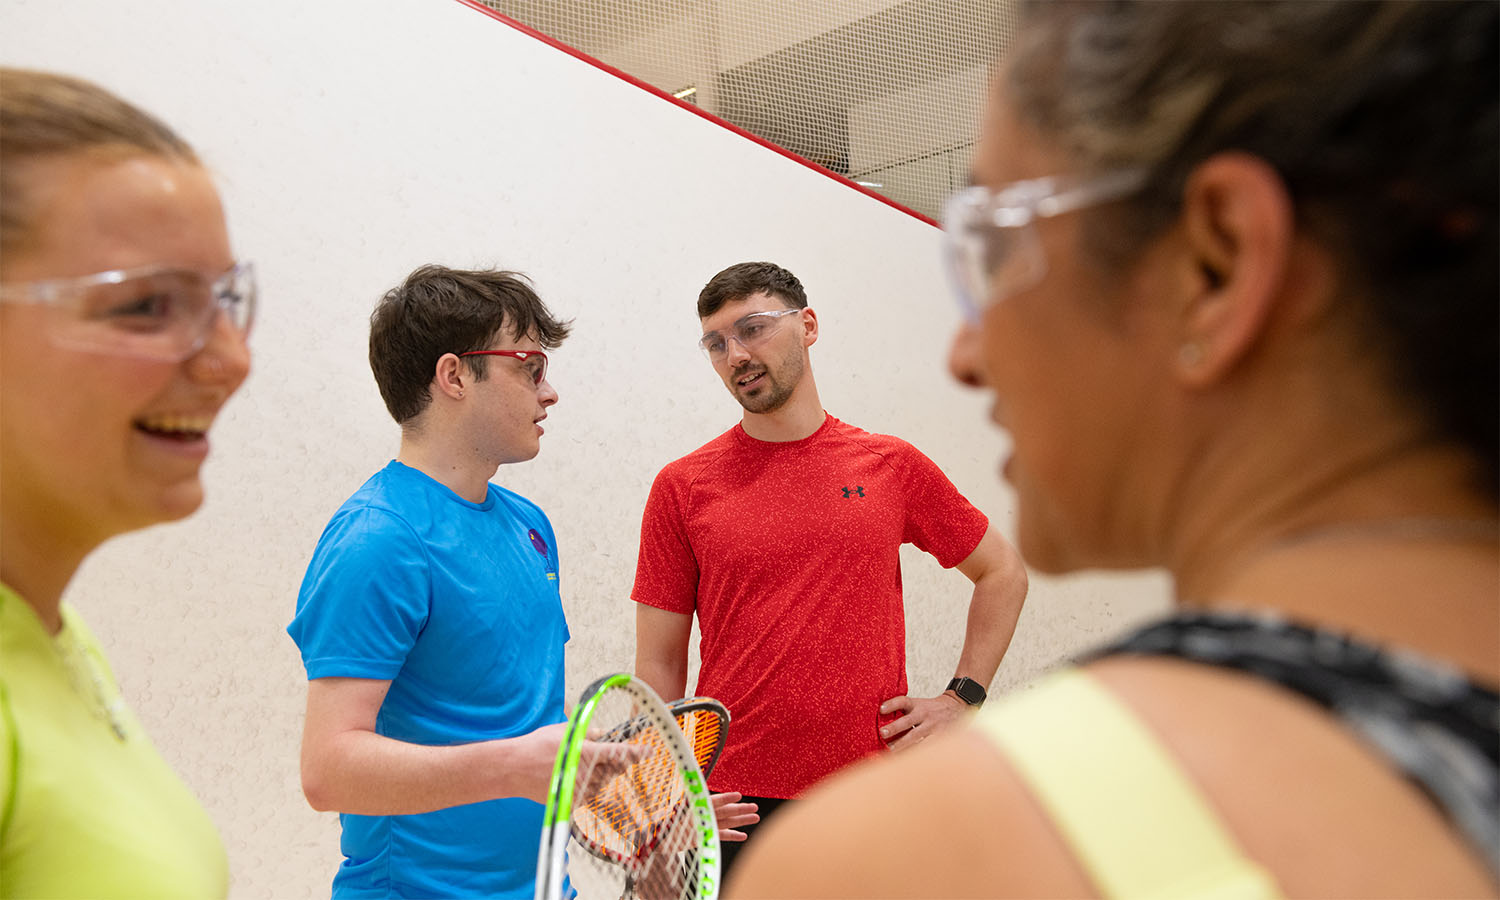 Players talking on a squash court